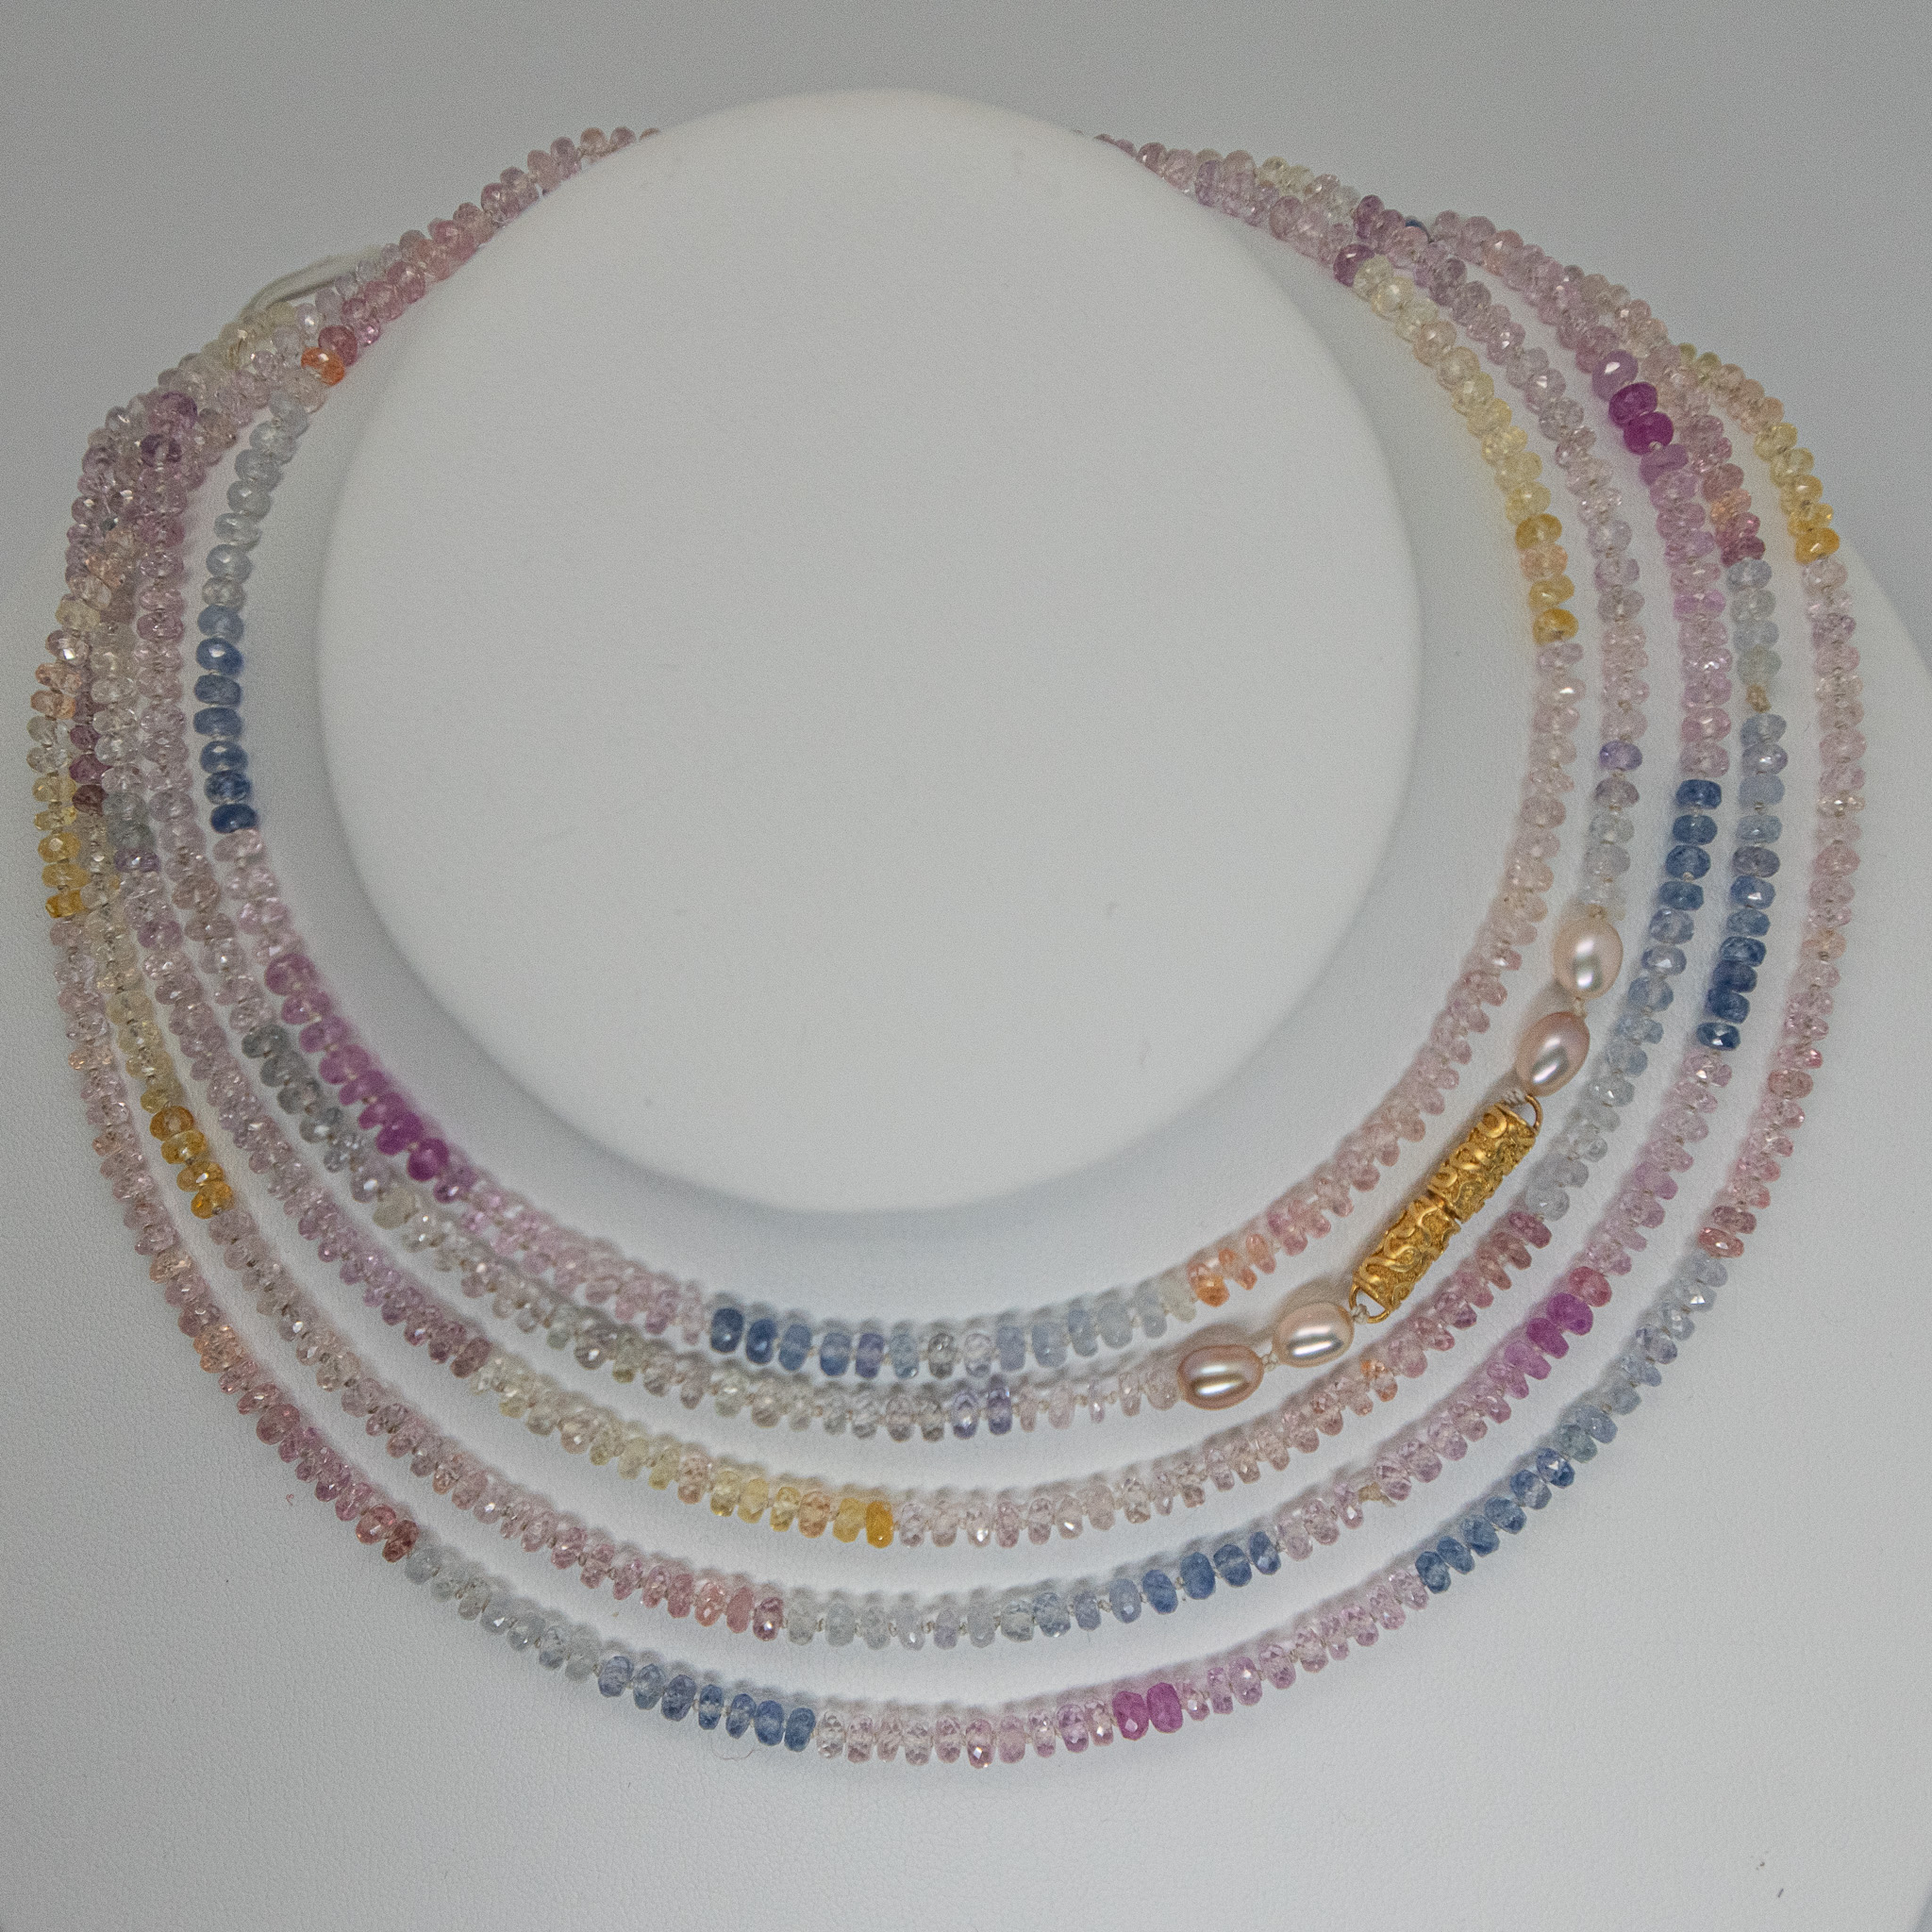 delicate multi-color sapphire necklace shown wrapped 4 times for a choker-length look